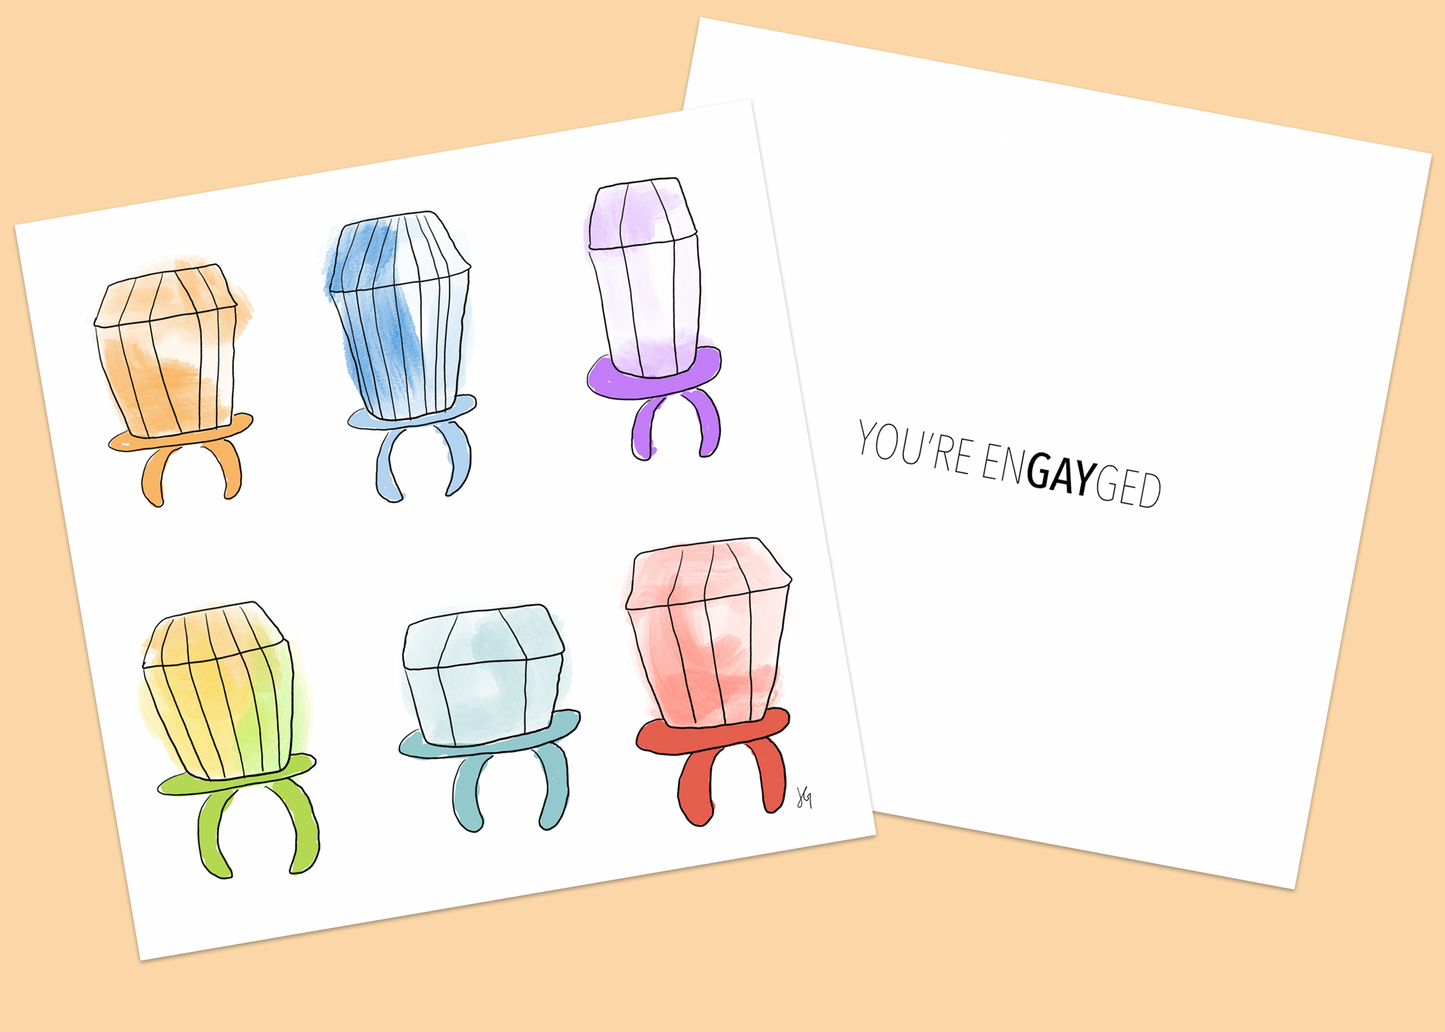 You're EnGAYged - Card